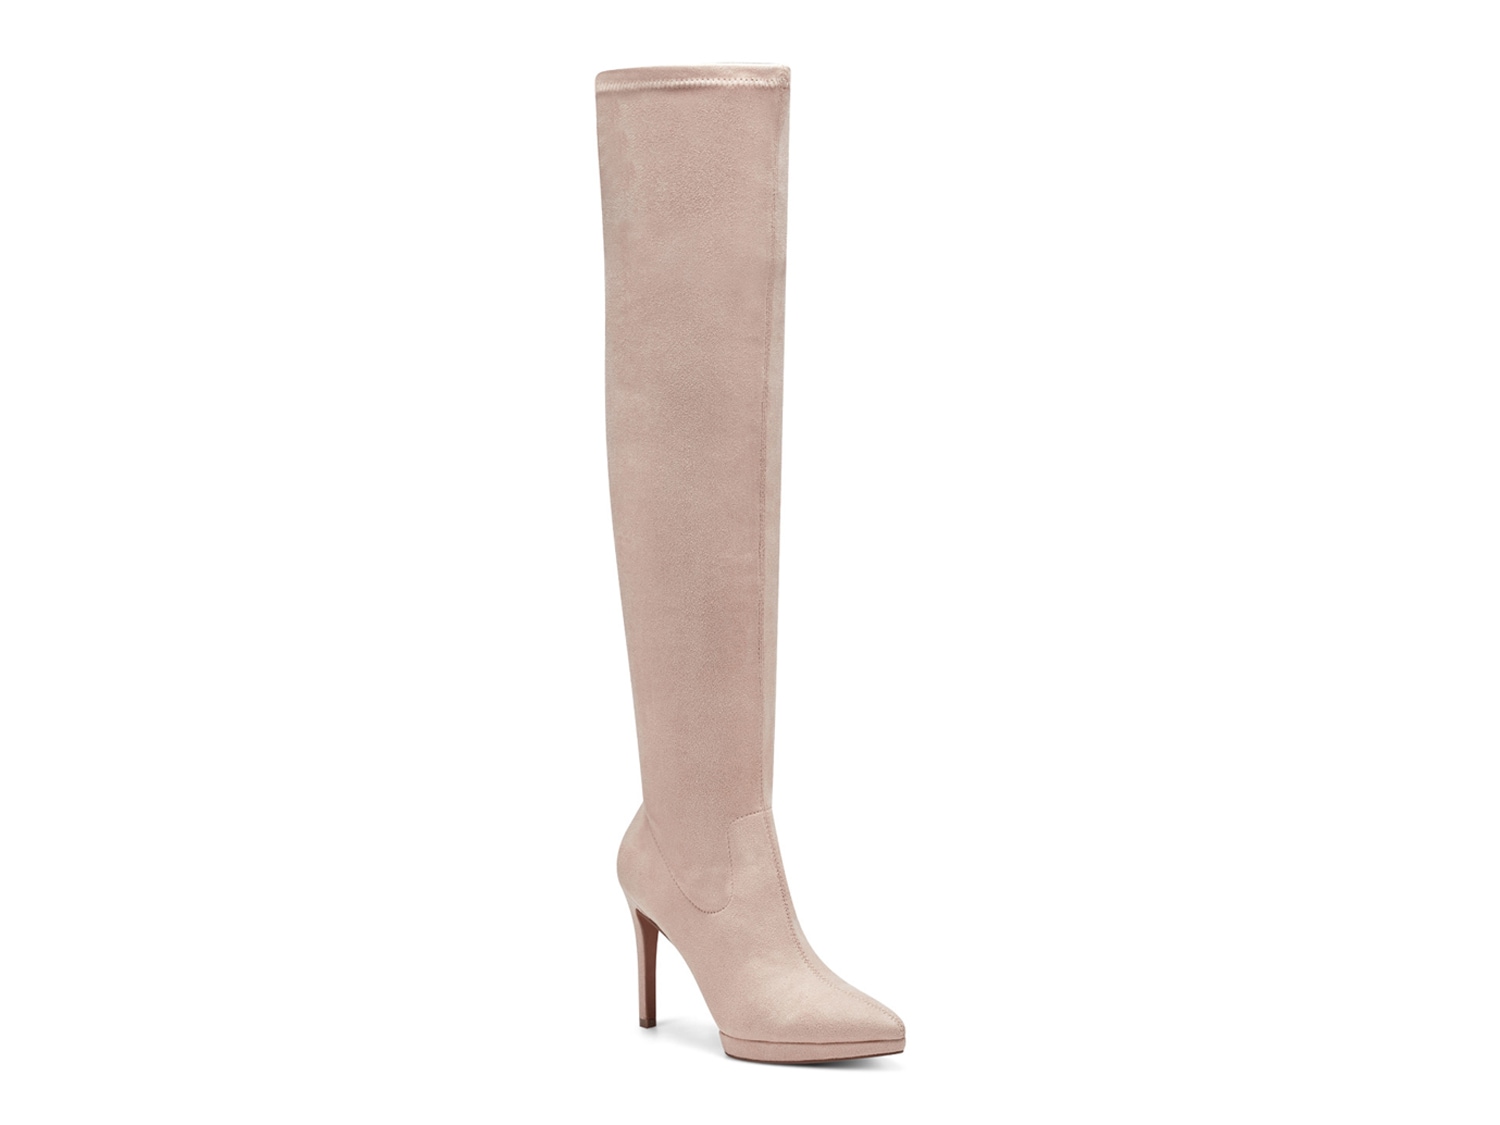 Jessica Simpson Vallrie Over-the-Knee Boot - Free Shipping